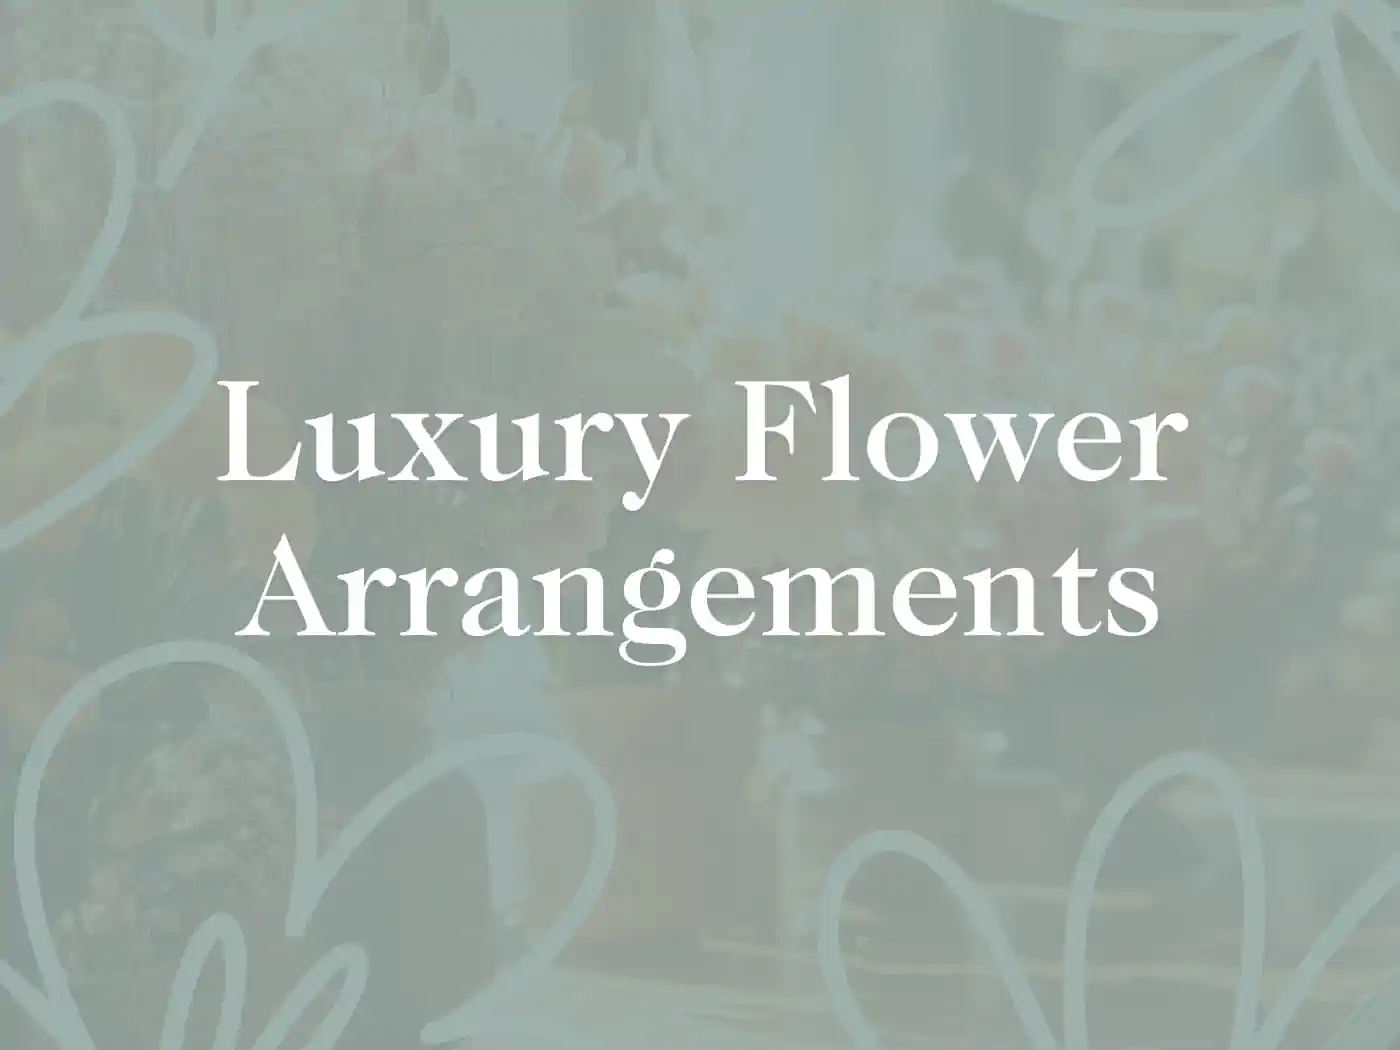 Luxury Flower Arrangements text overlay on a soft floral background. Fabulous Flowers and Gifts, Luxury Flower Arrangements.